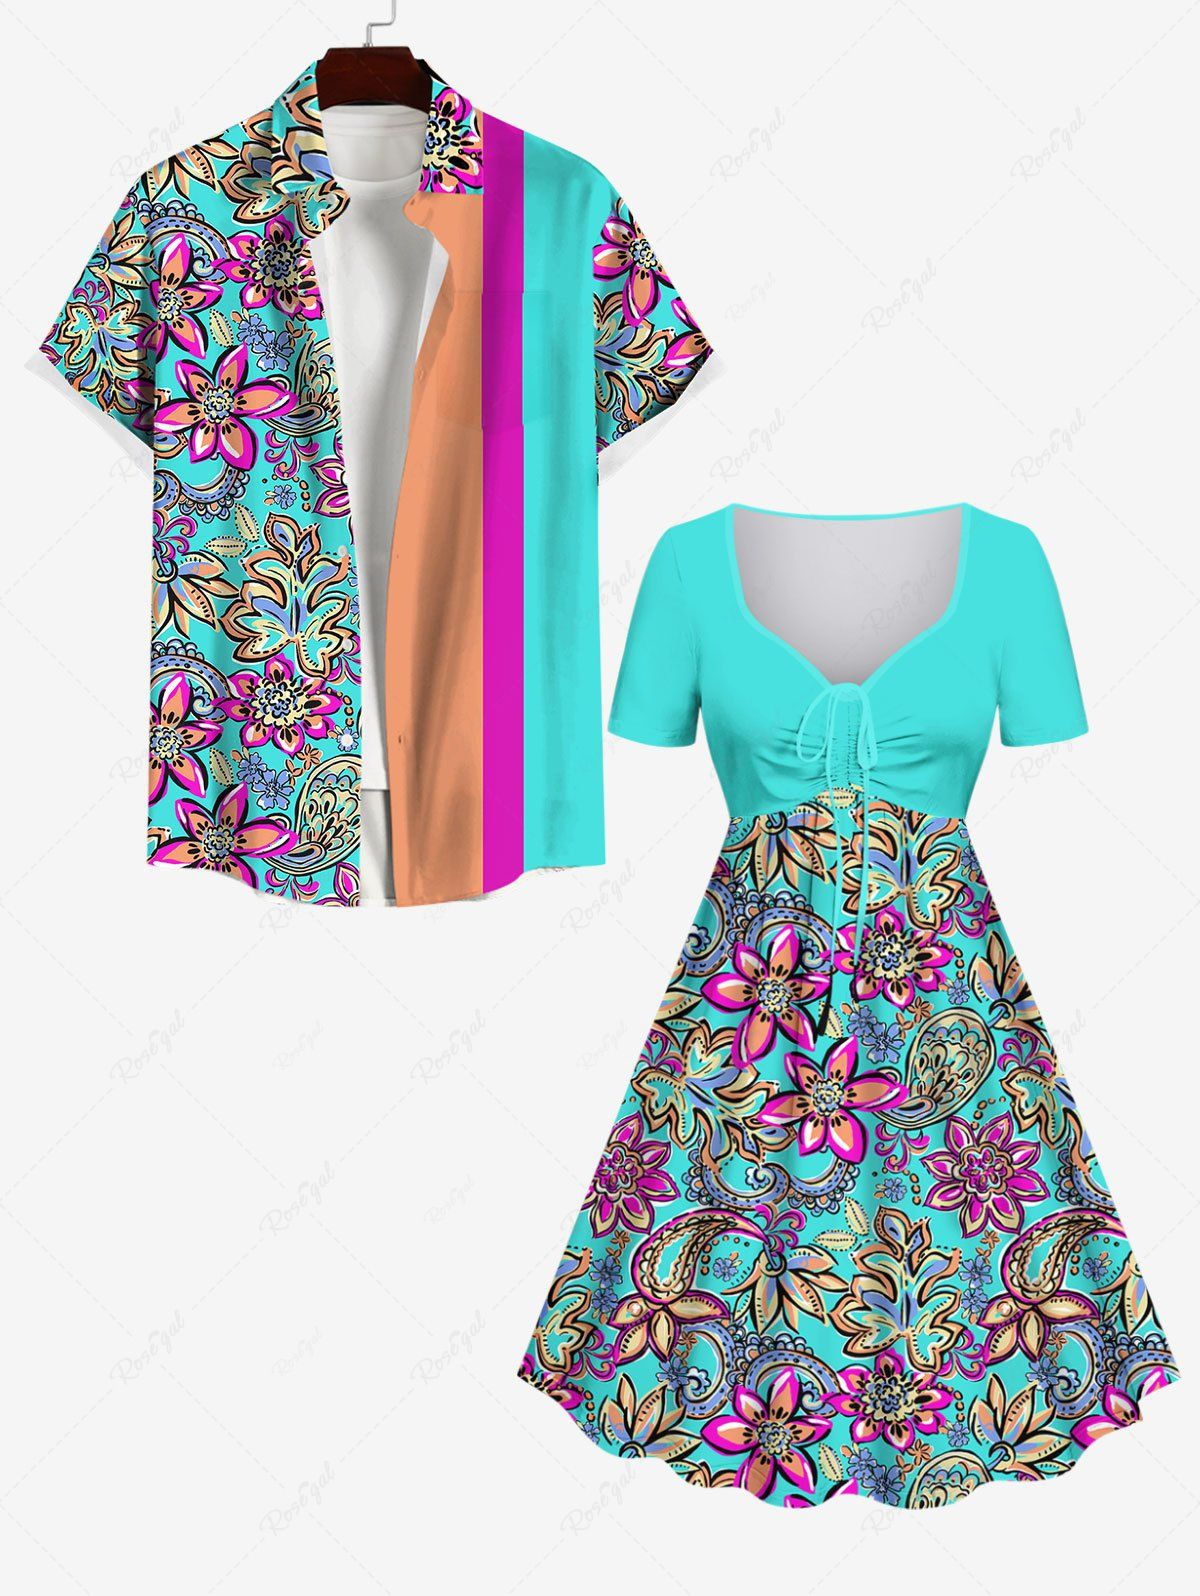 Trendy Floral Paisley Print Cinched Dress and Striped Button Pocket Shirt Plus Size Hawaii Beach Outfit for Couples  